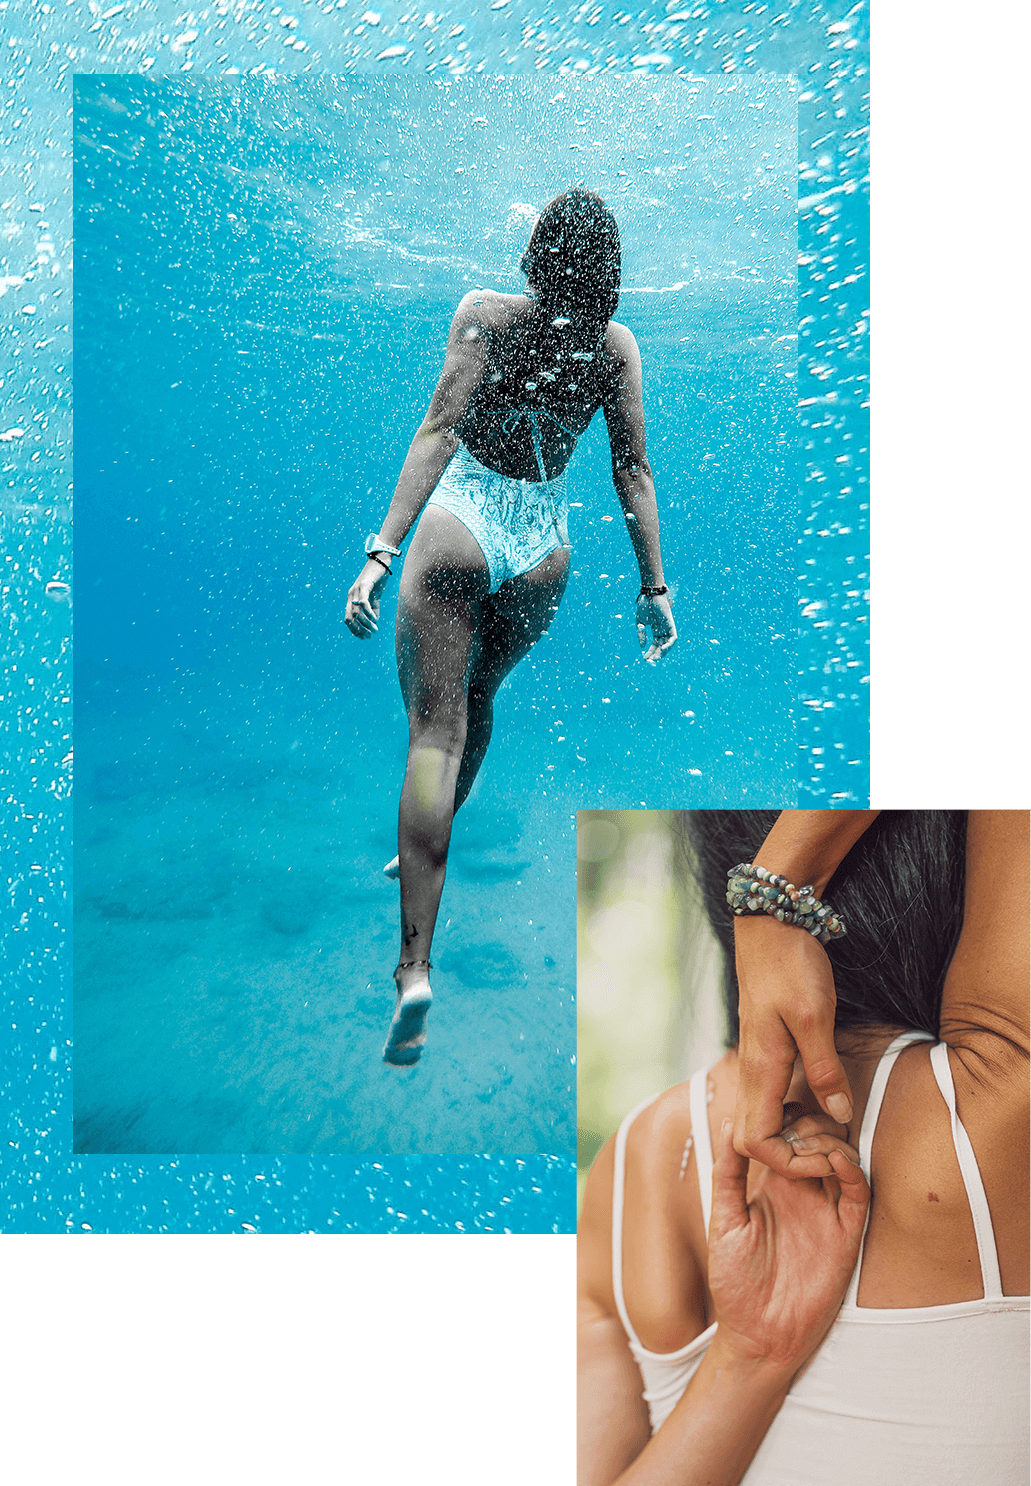 Two images overlap: underwater photo of woman swimming, covered partially by woman stretching her arms